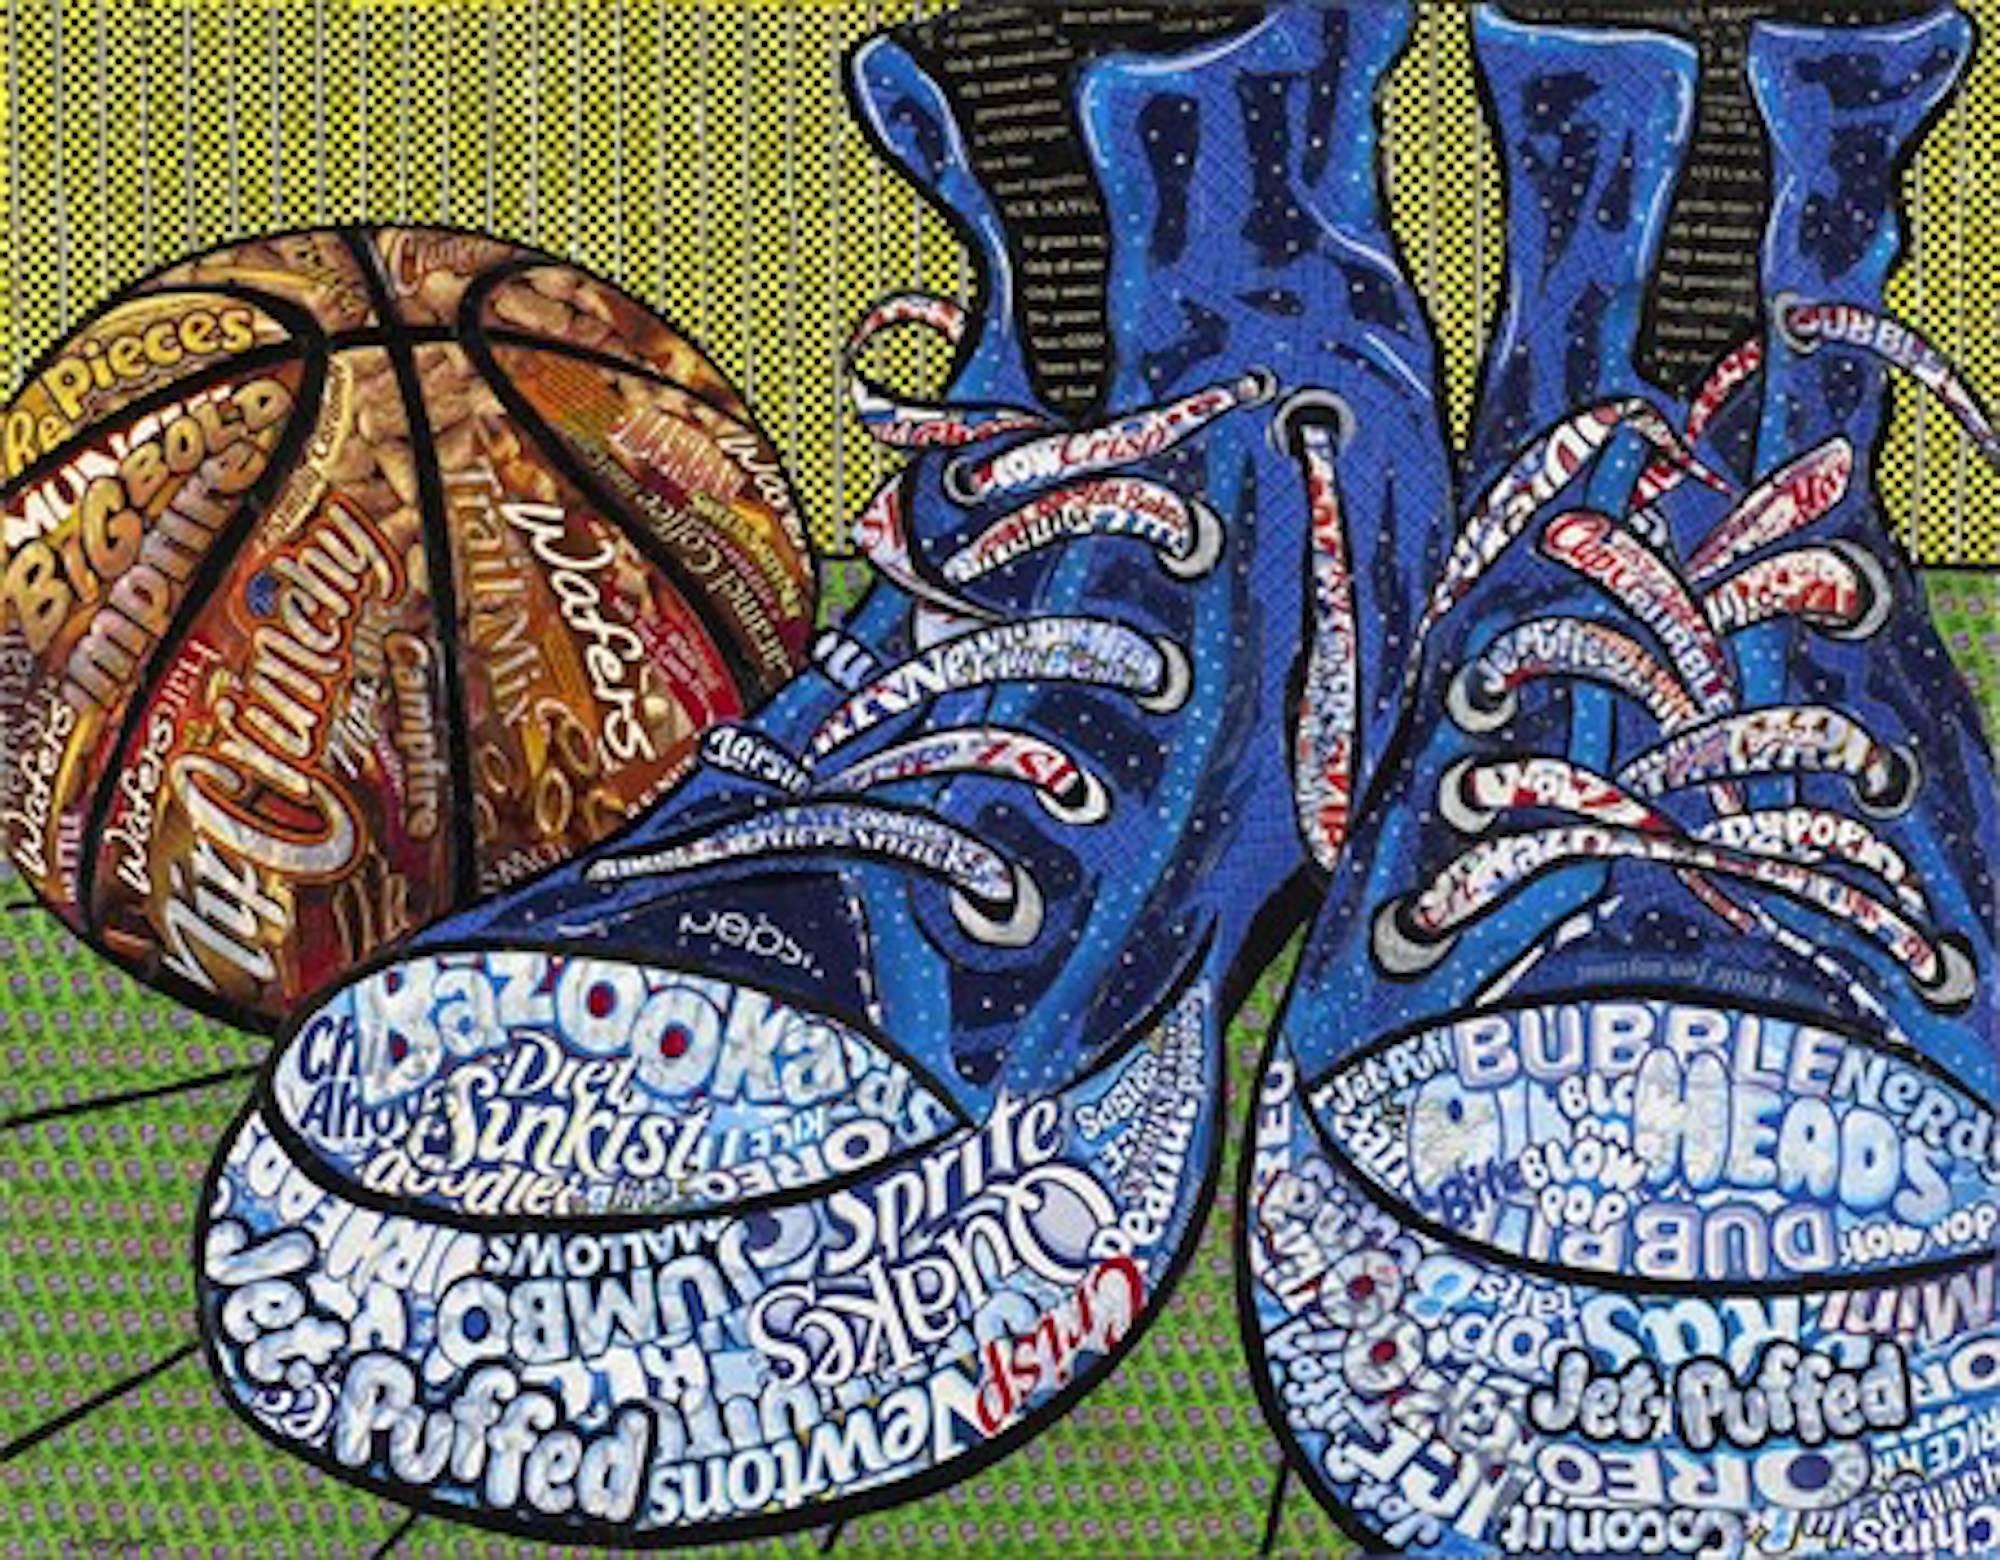 Still Life With Sneakers - Original - Part of Candy Wrapper Collage Series - Mixed Media Art by Laura Benjamin